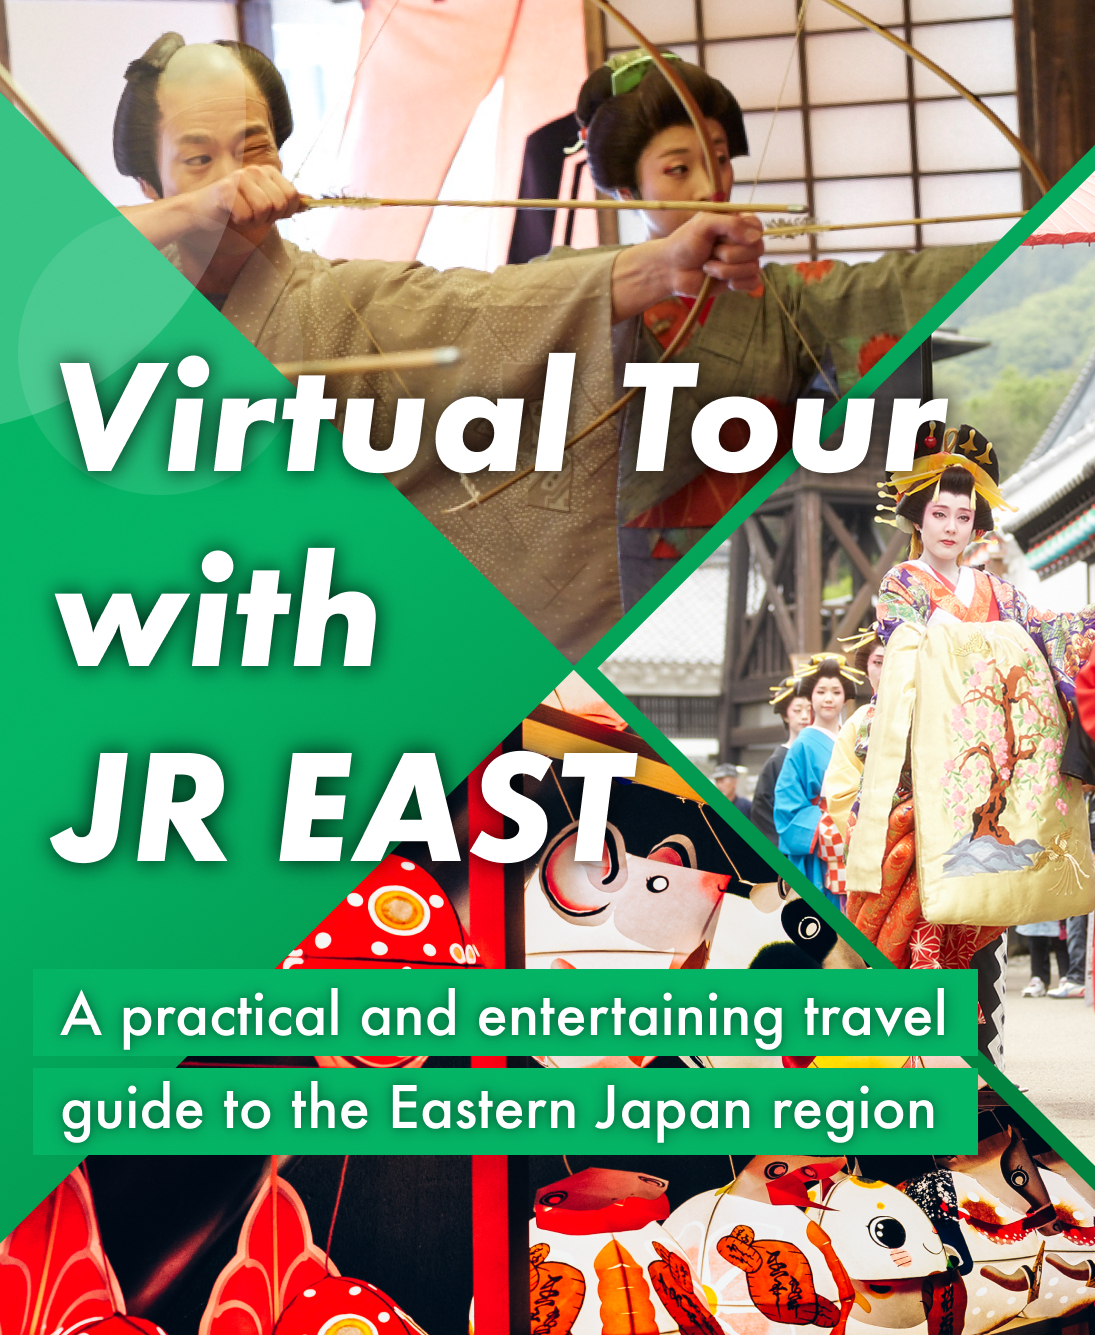 Virtual Tour with JR EAST. A practical and entertaining travel guide to the Eastern Japan region